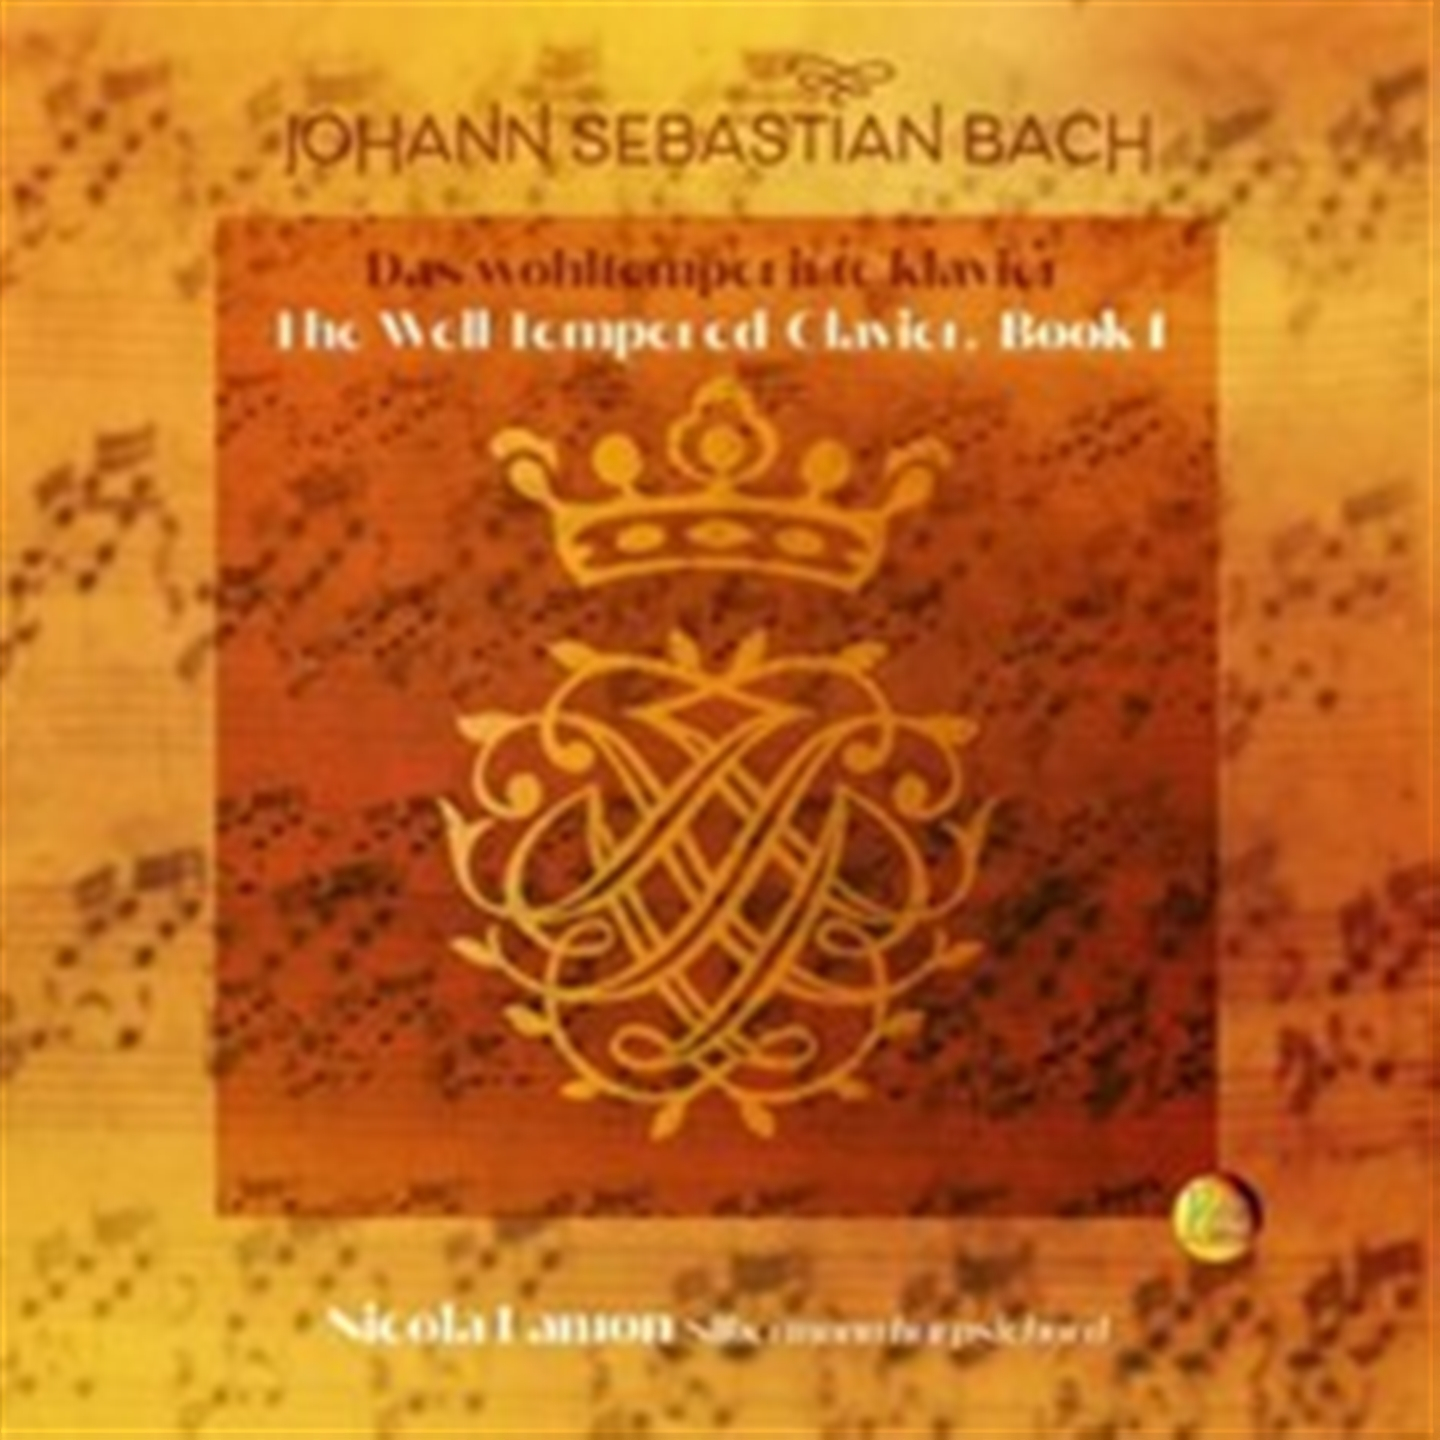 BACH: THE WELL TEMPERED- CLAVIER - BOOK I